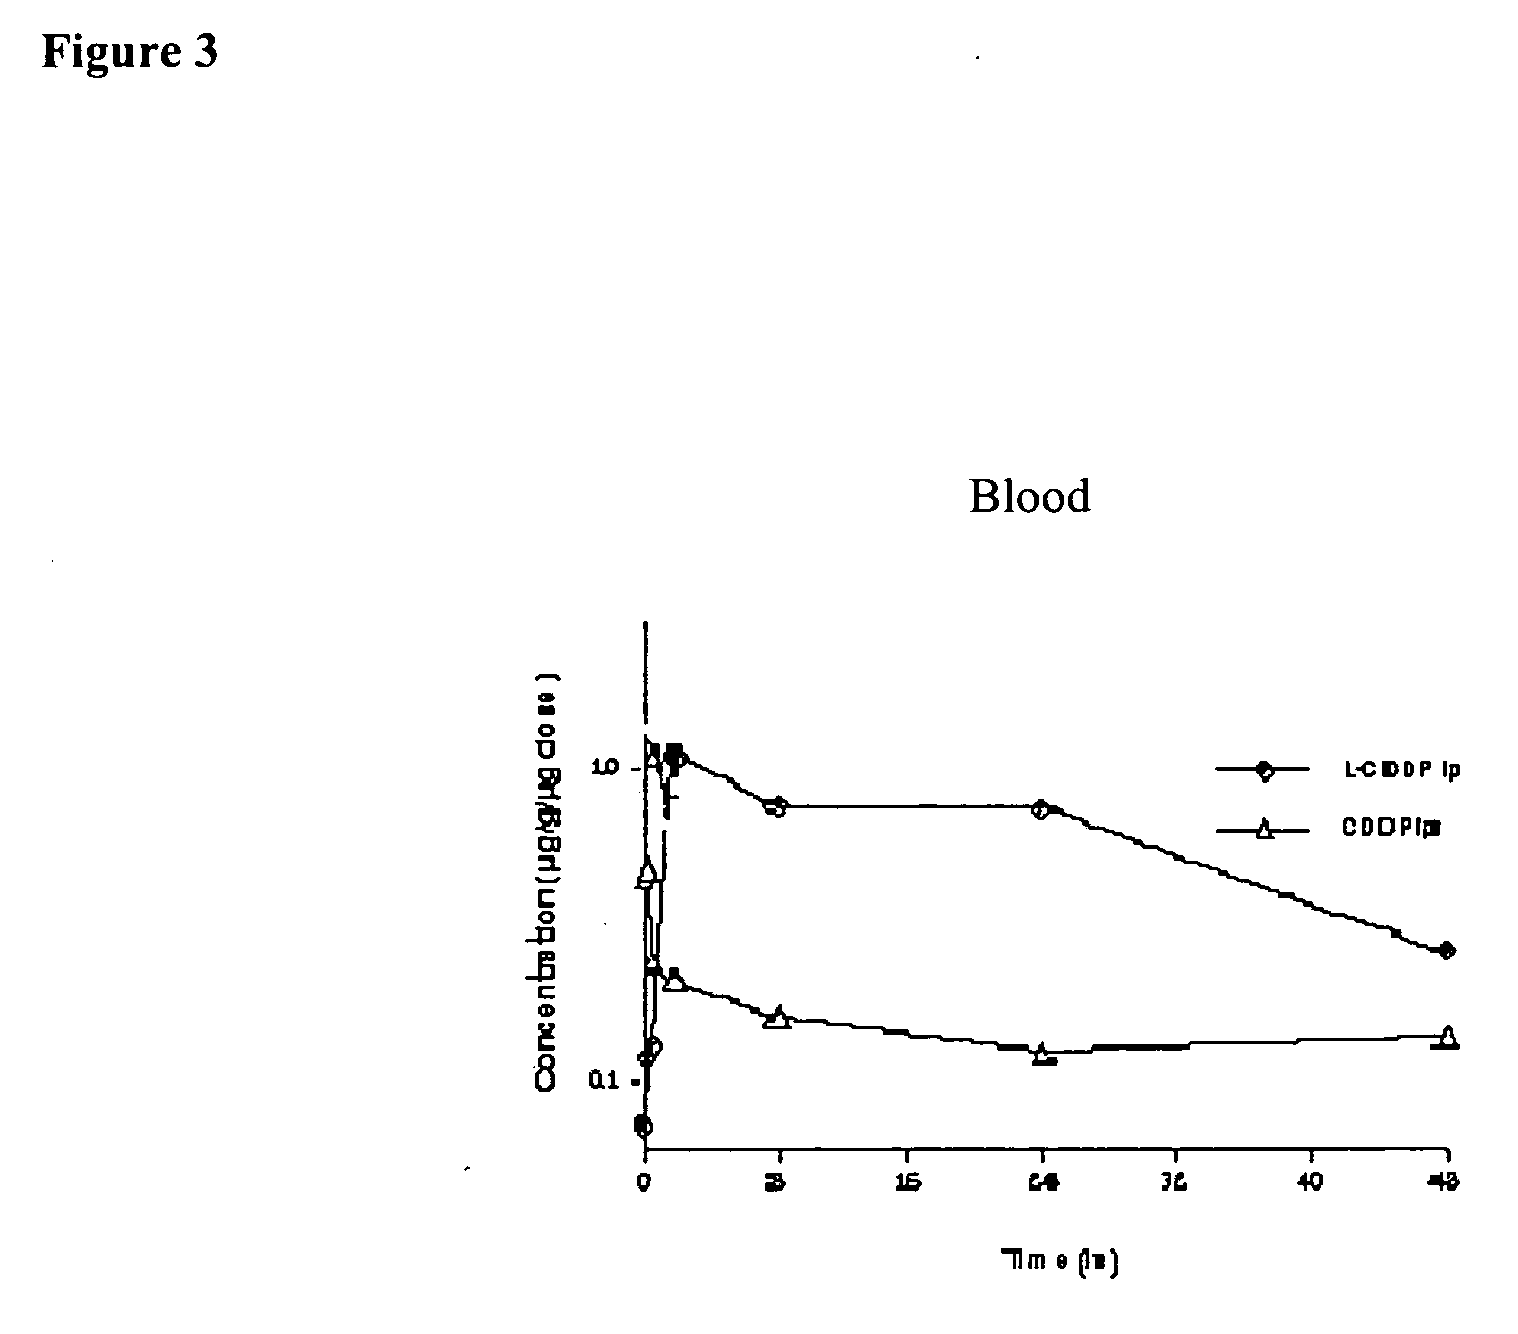 Methods of treating cancer with lipid-based platinum compound formulations administered intraperitoneally